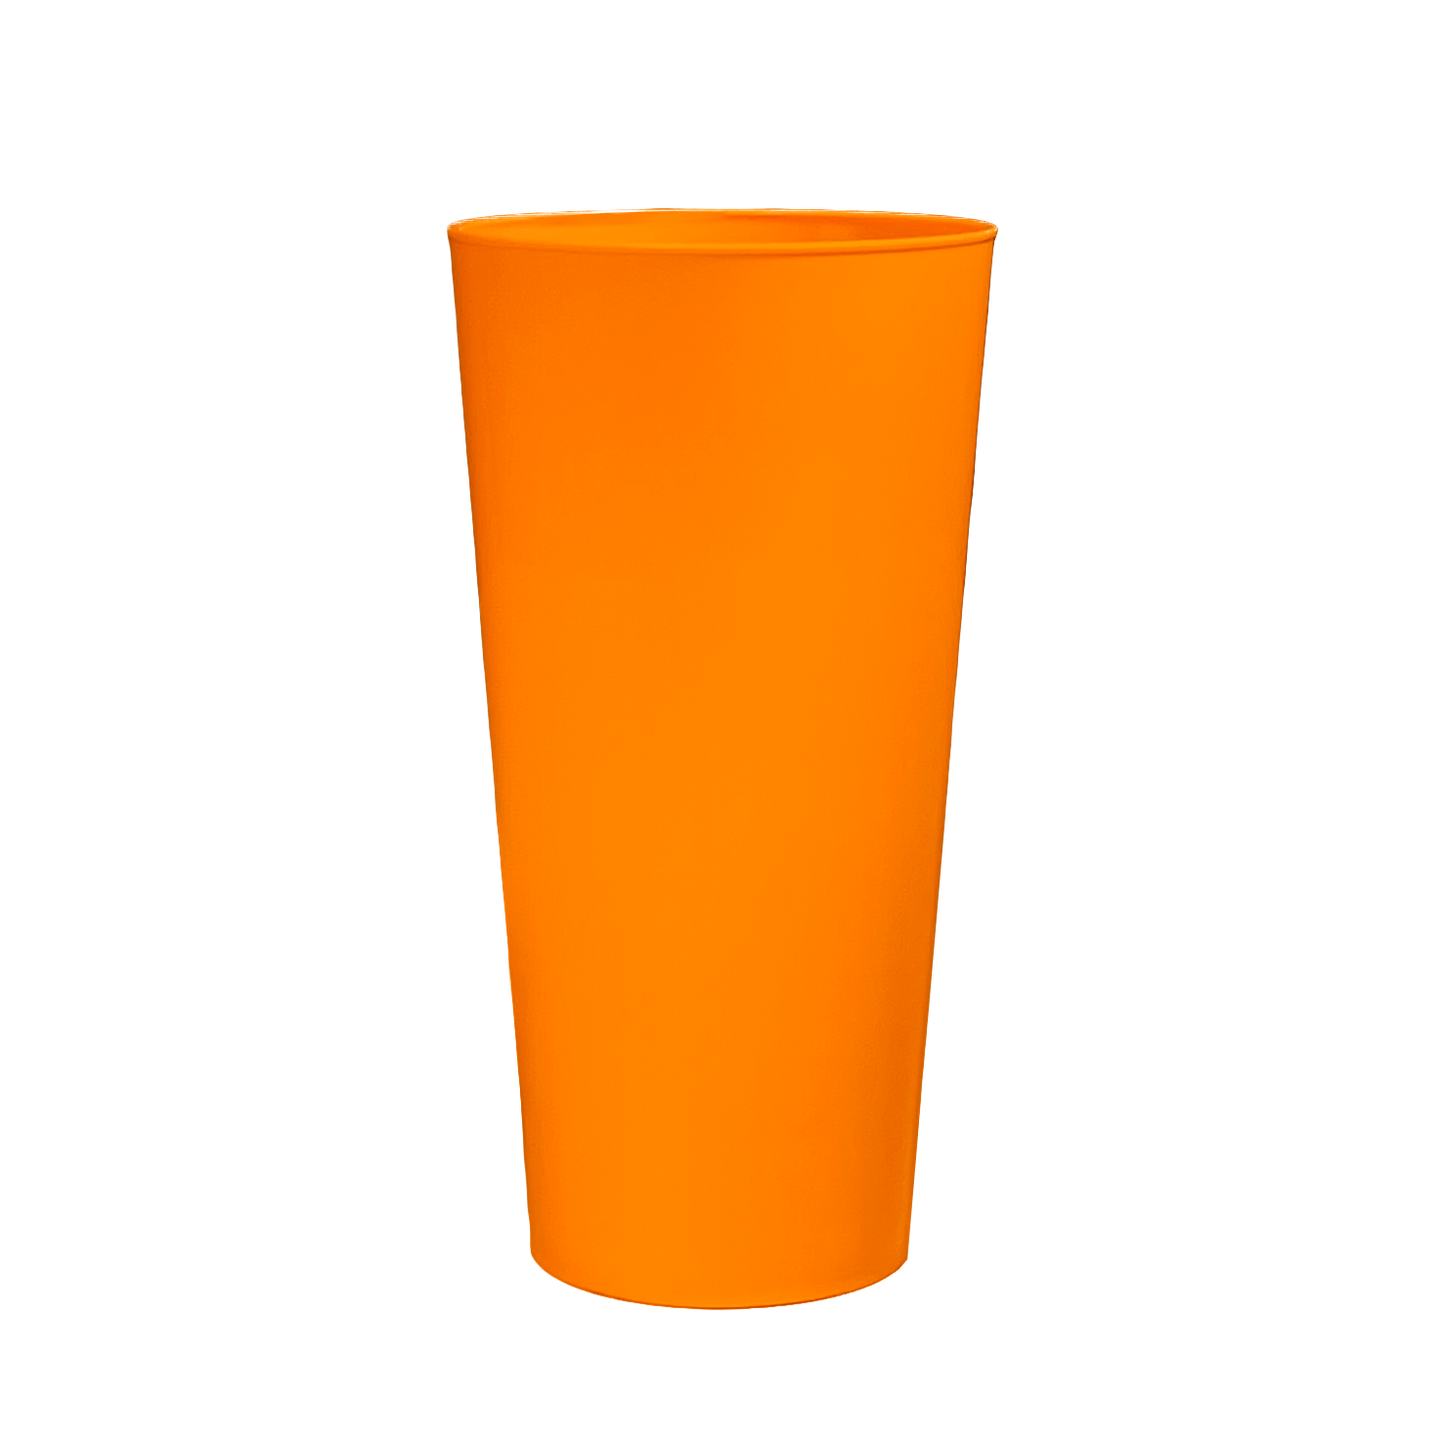 Pack of 12 Pint Cups Coloured Reusable Plastic - 1 Pint 568ml 20oz - Dishwasher Safe for Beer, Soft Drinks, Water - Six Colours (2 of Each Colour)